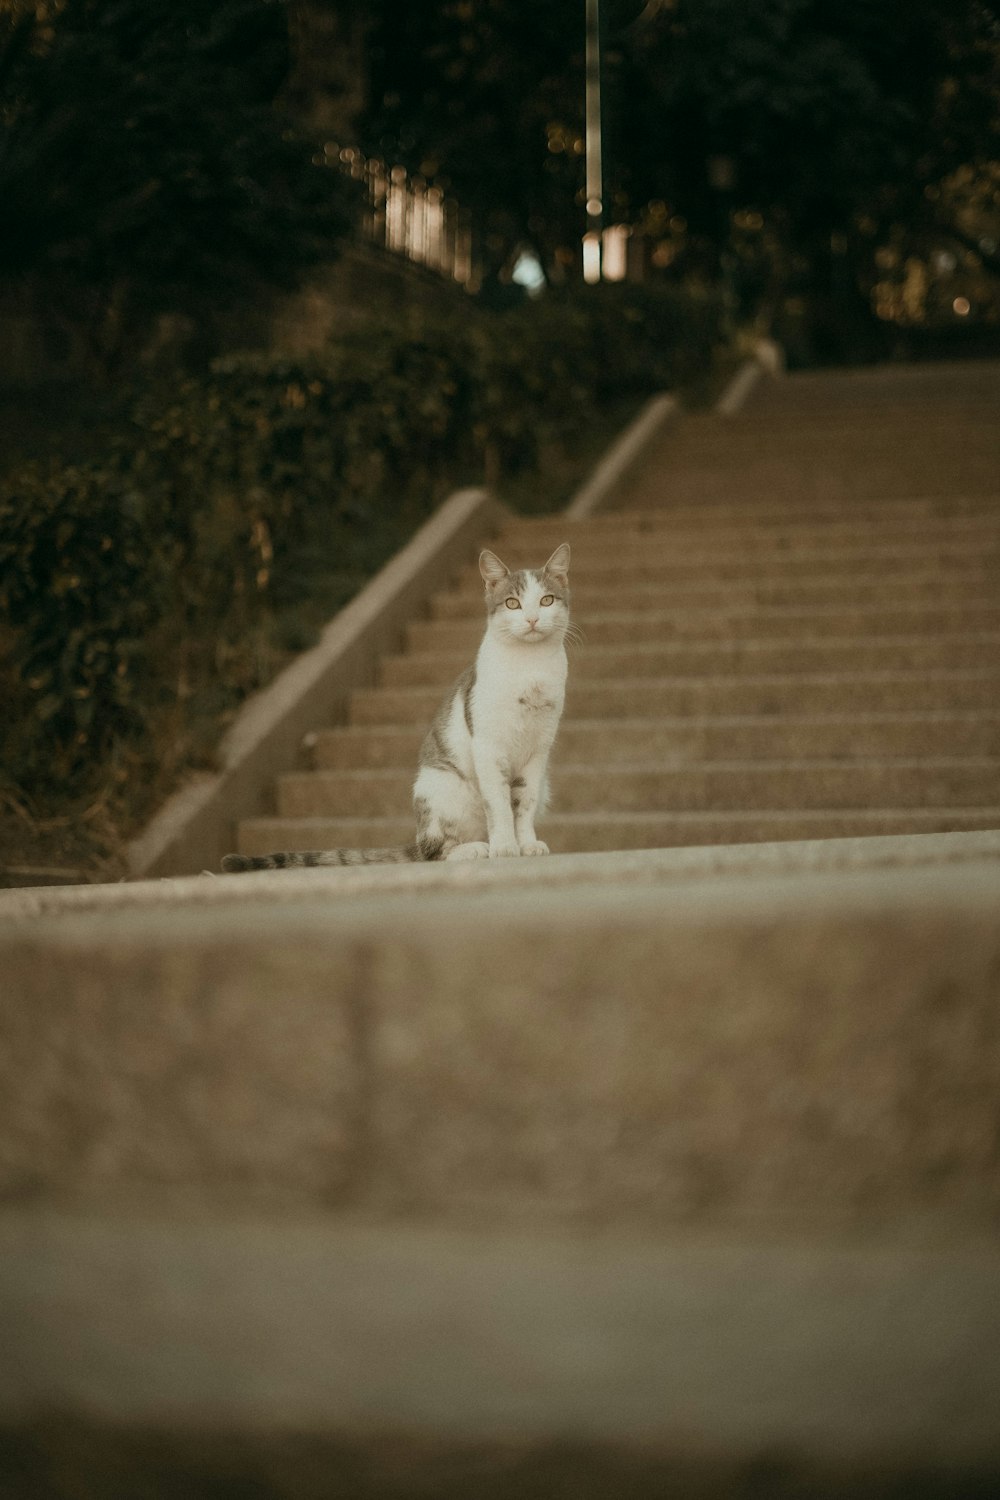 a cat sitting on the steps of a building